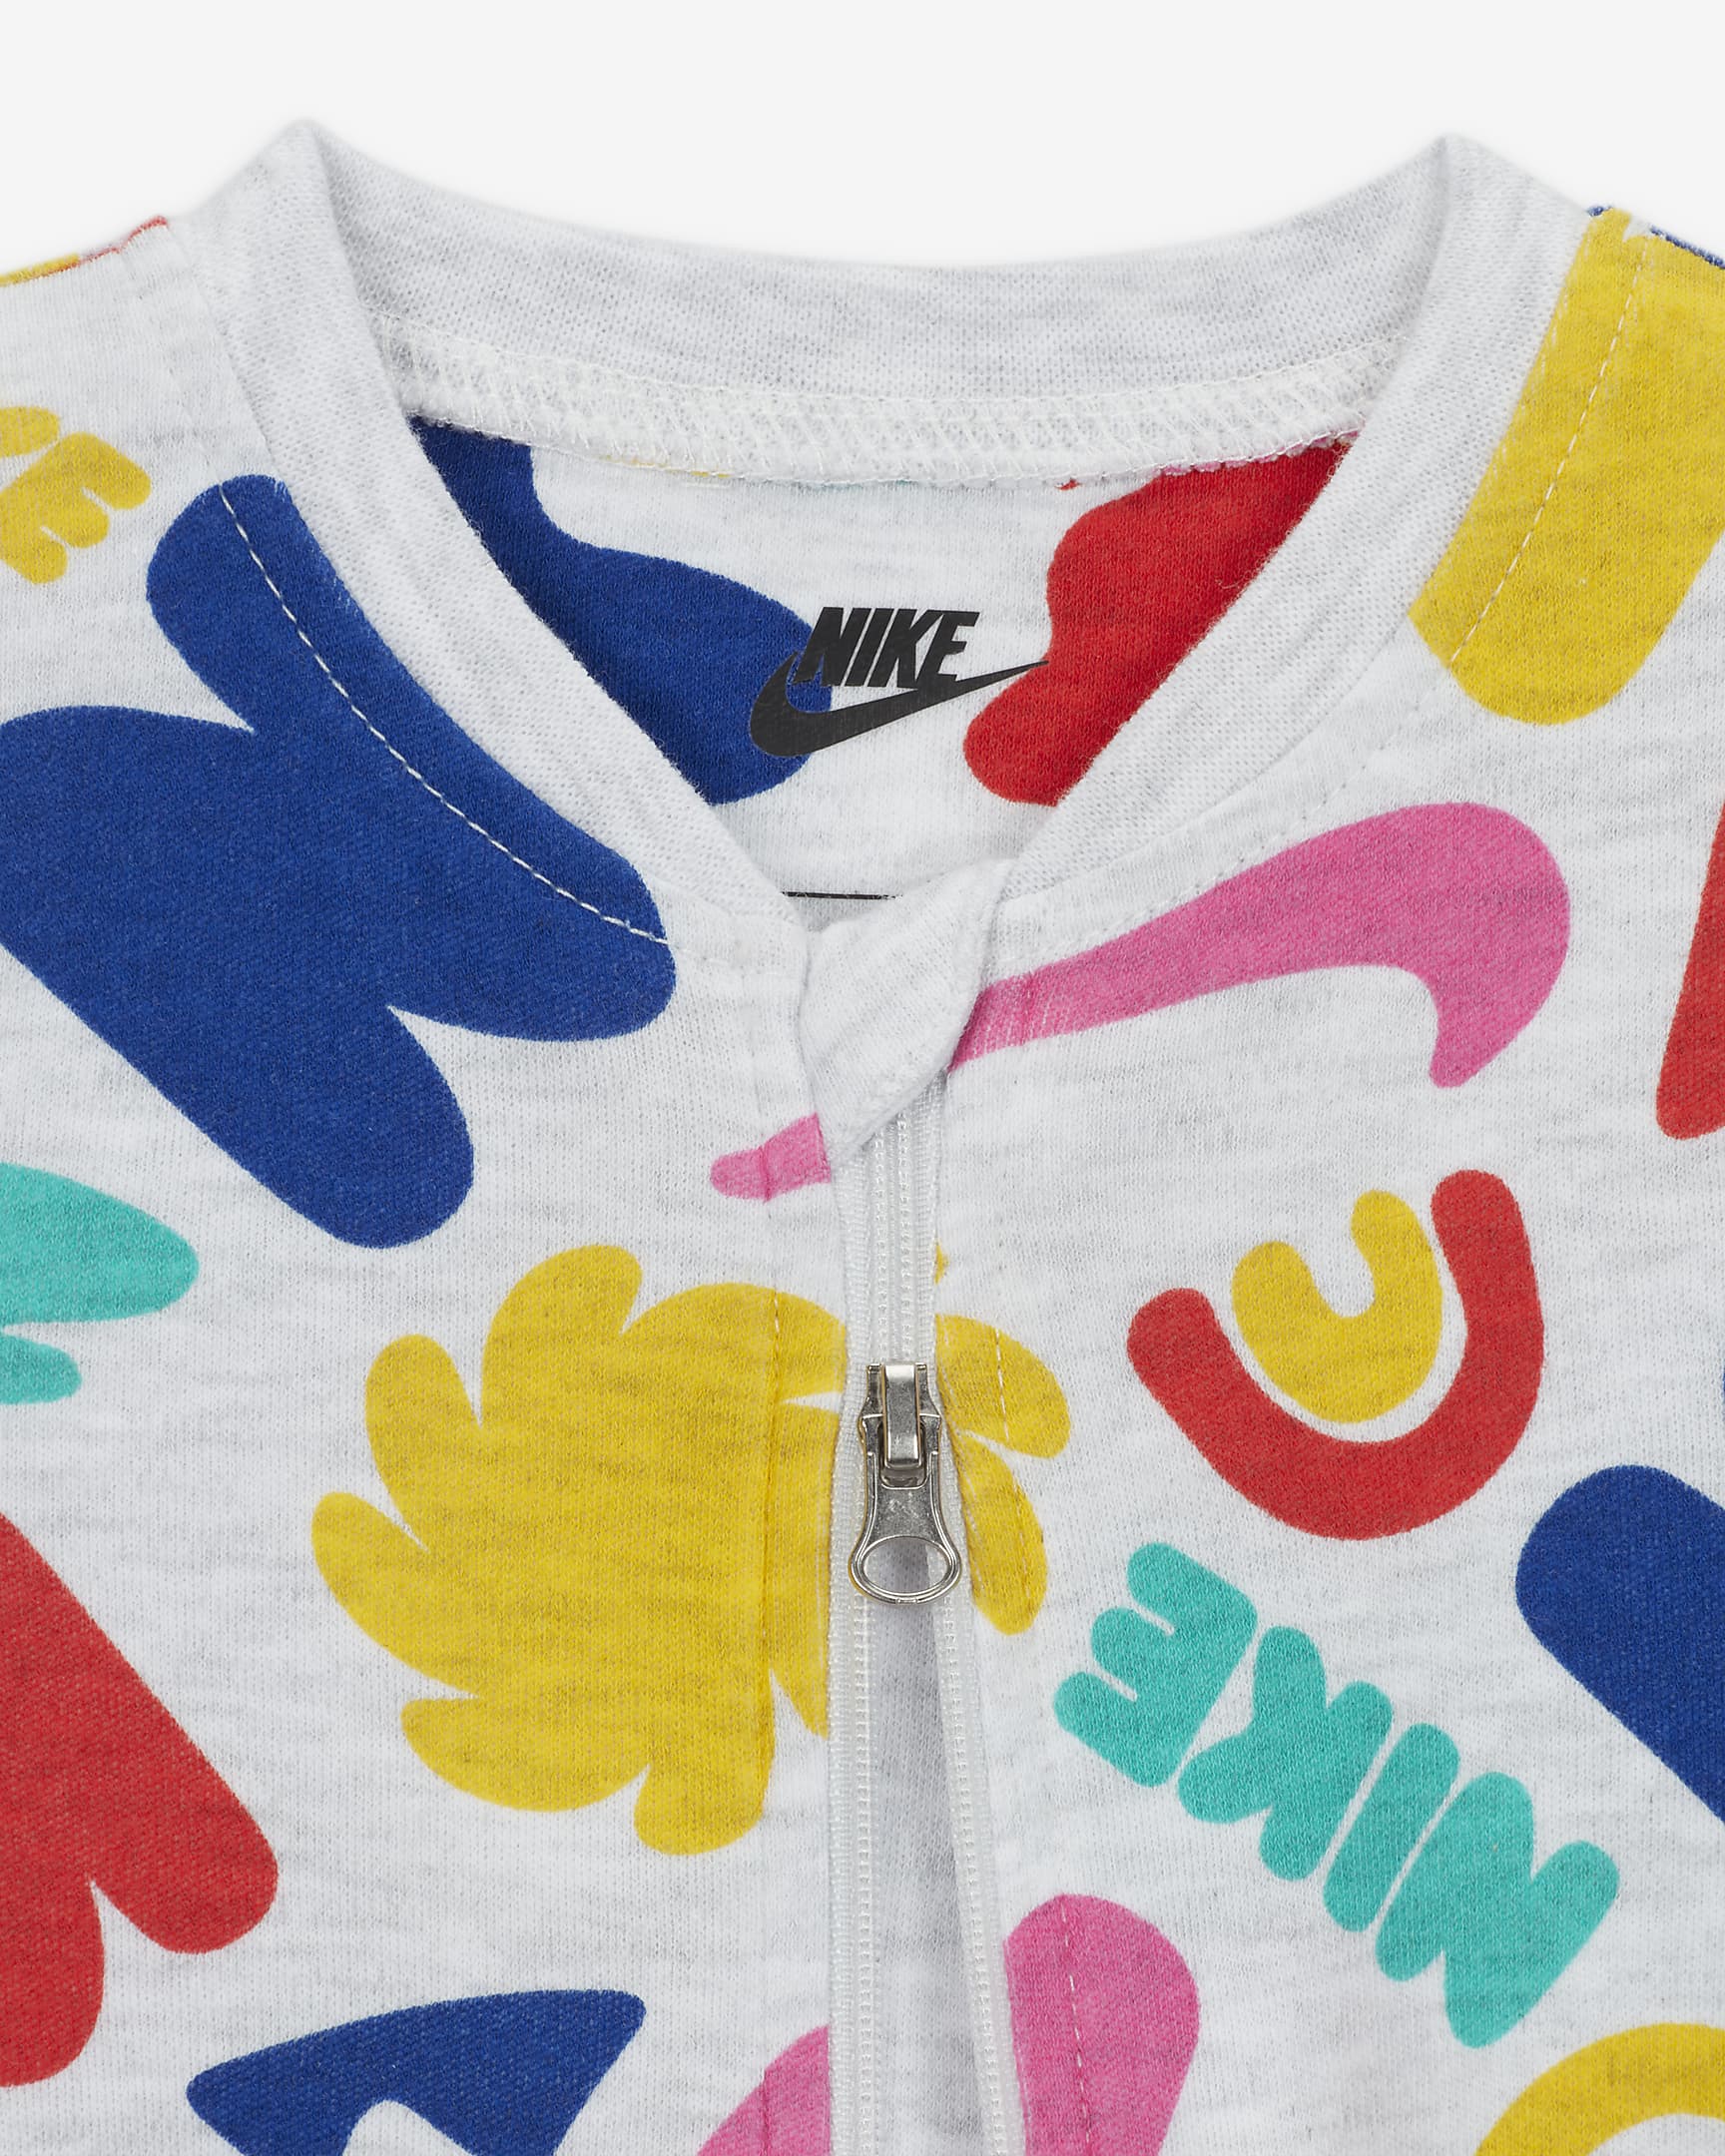 Nike Sportswear Primary Play Footed Overalls Baby Overalls. Nike UK